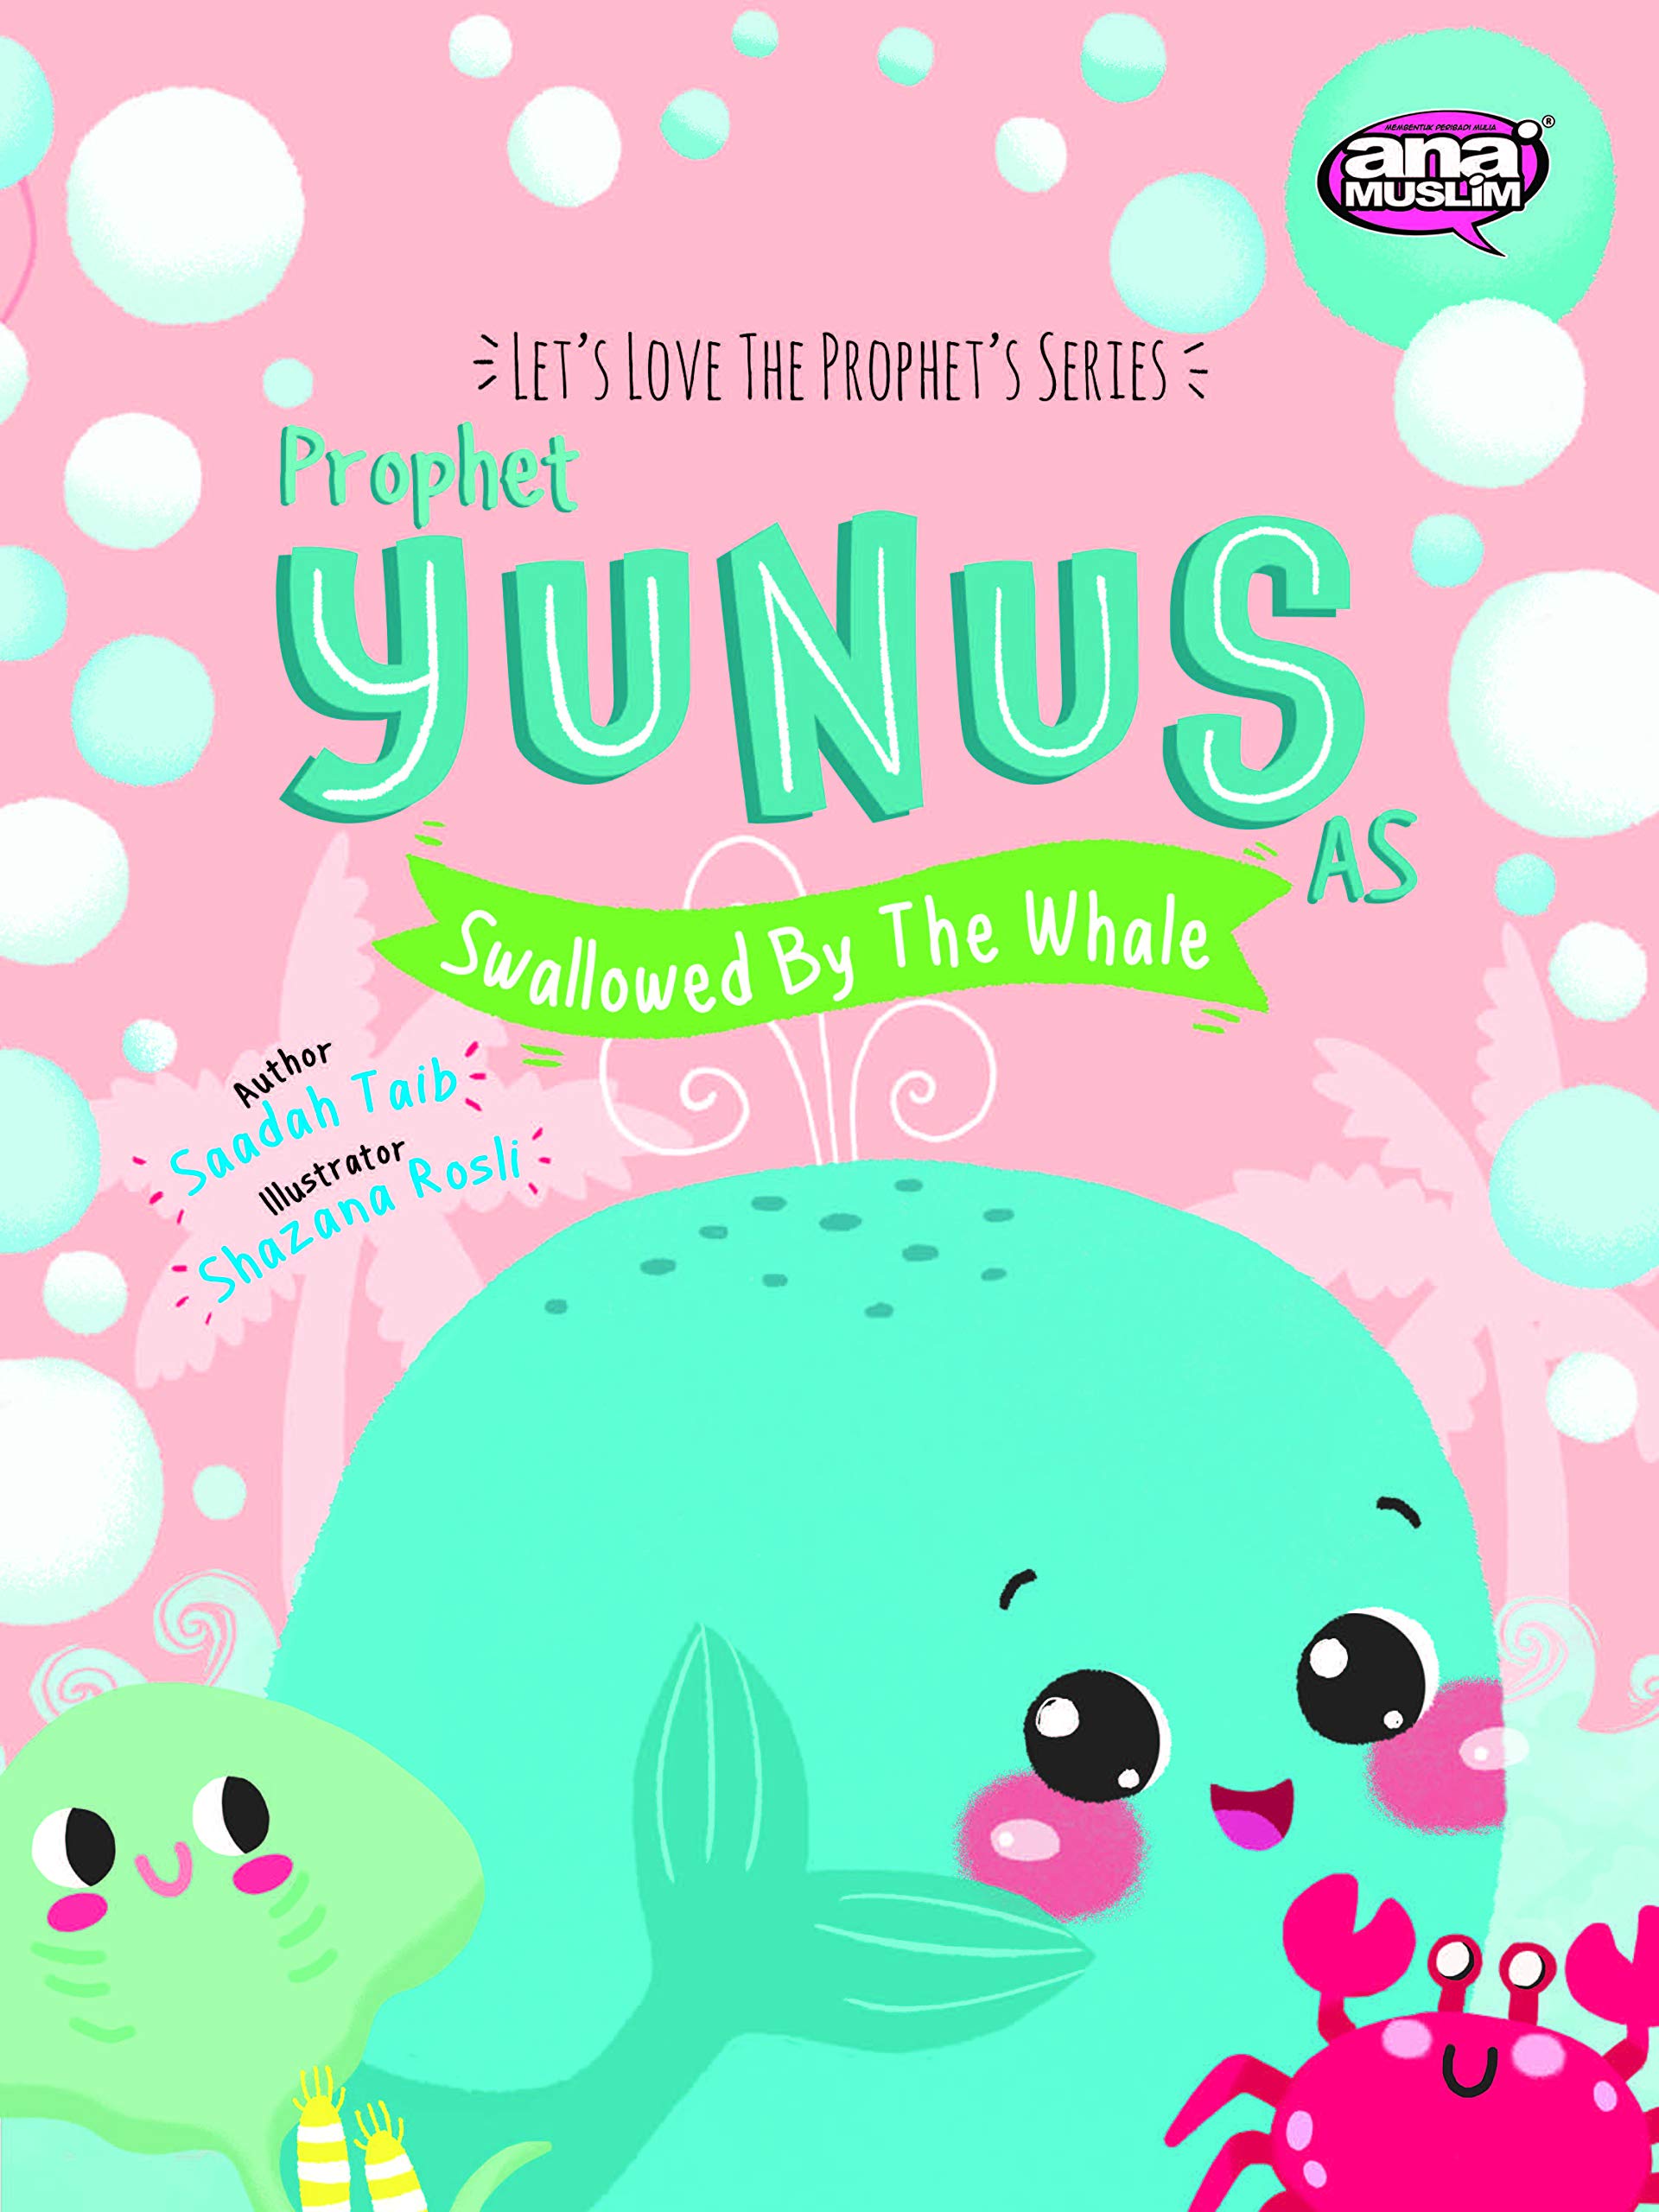 The Prophets of Islam Activity Book-Prophet Yunus As Swallowed By the Whale